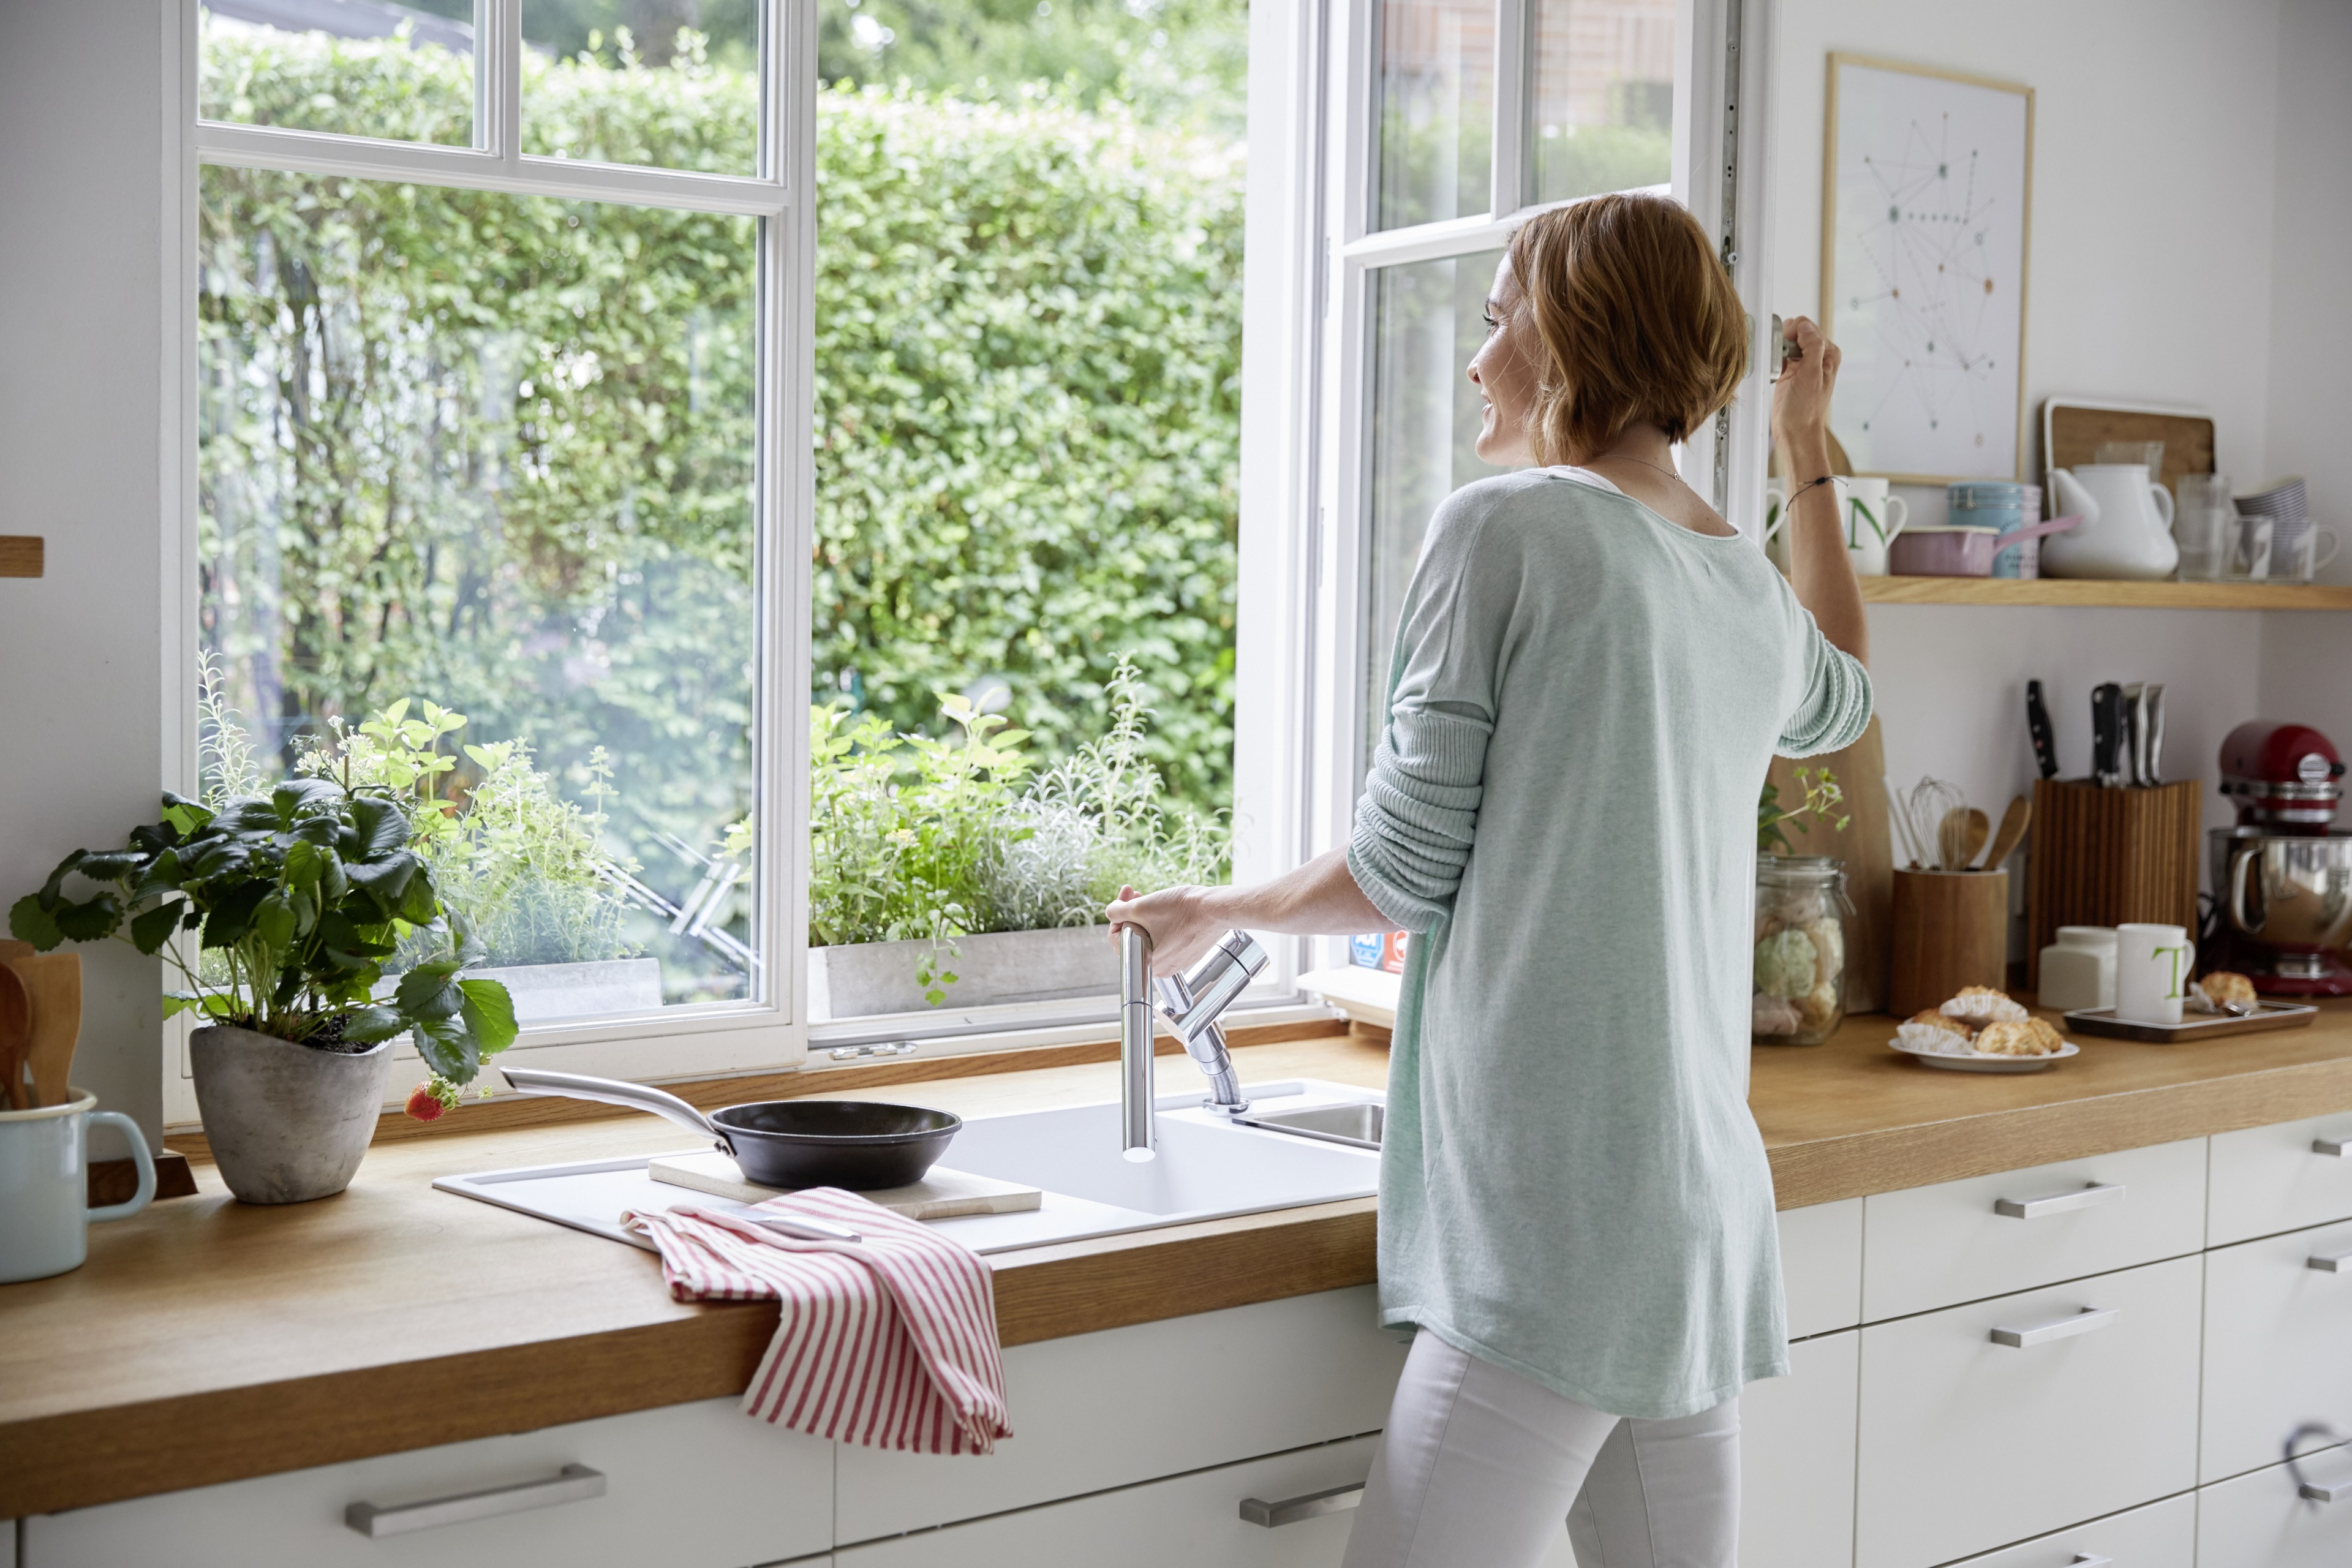 Make the most of the nicest place in the kitchen with a below-window mixer tap.